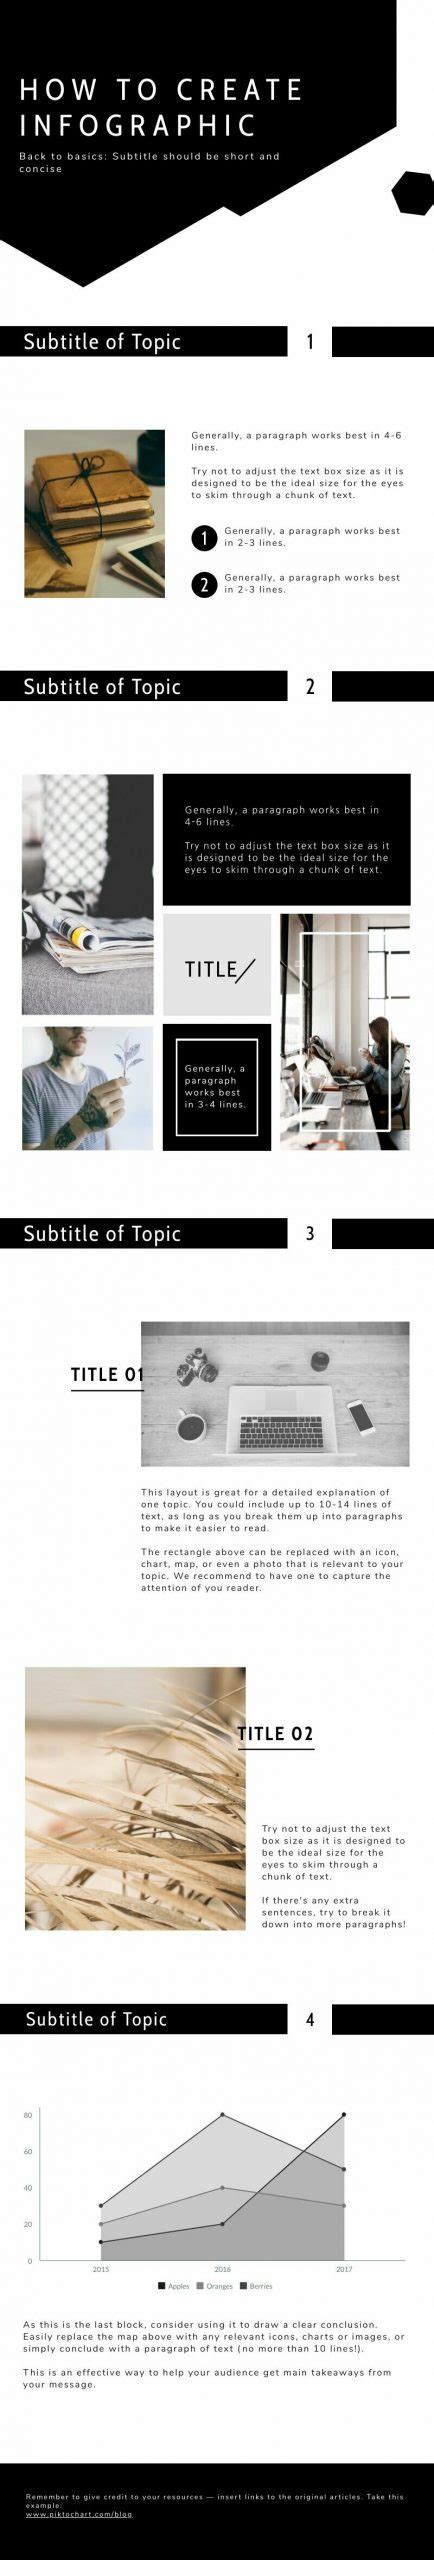 Project Proposal Free Infographic Template Piktochart